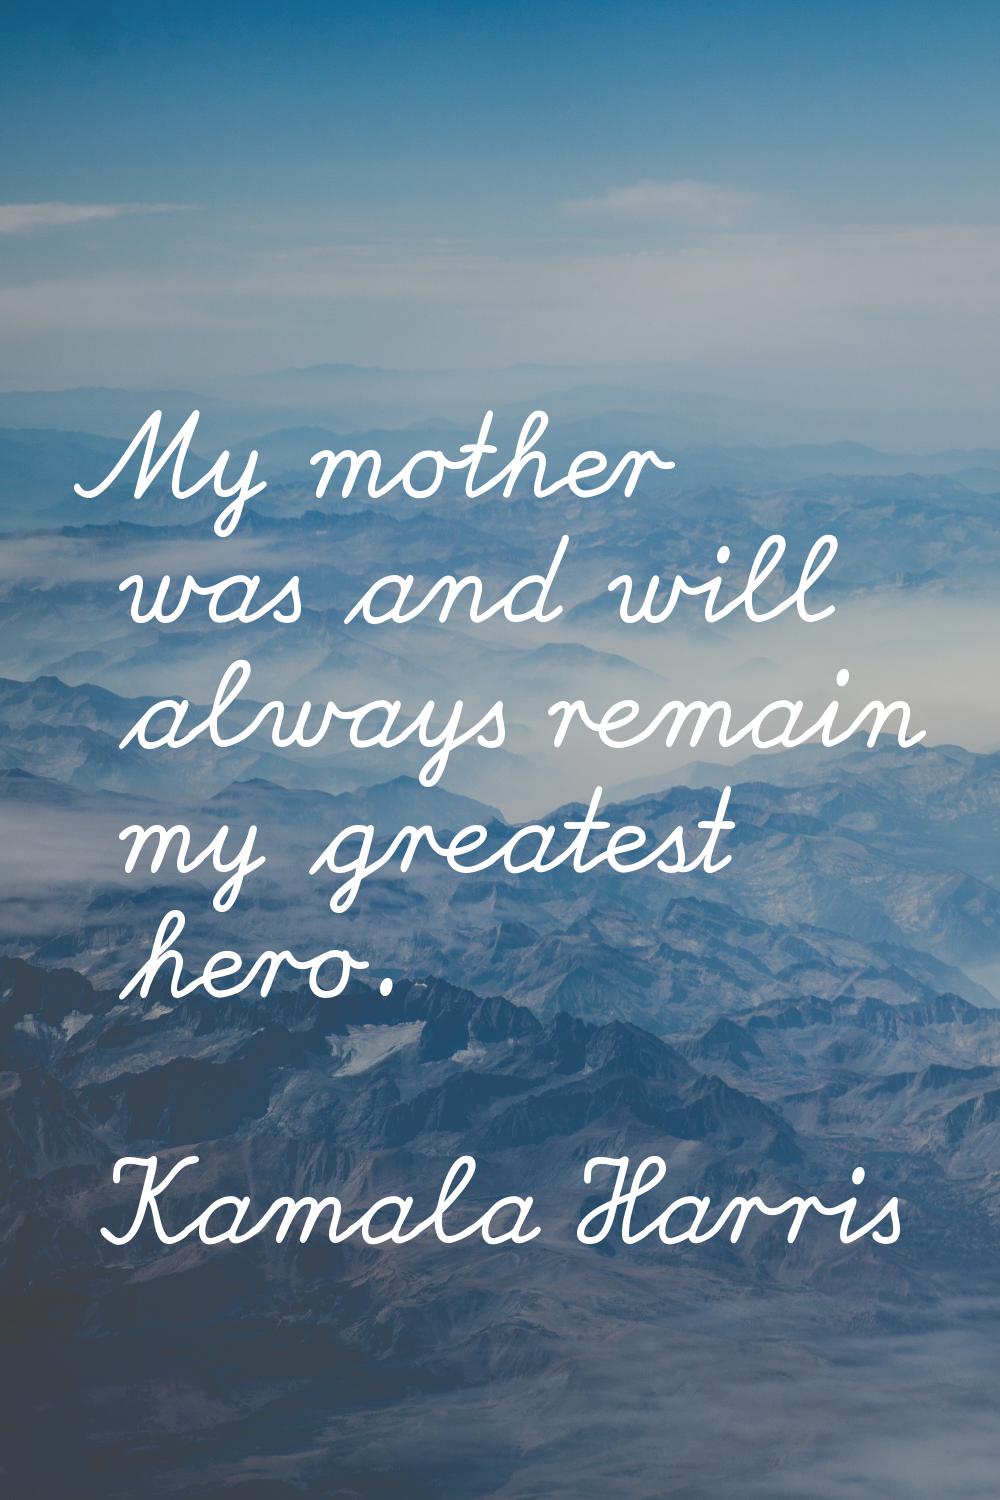 My mother was and will always remain my greatest hero.